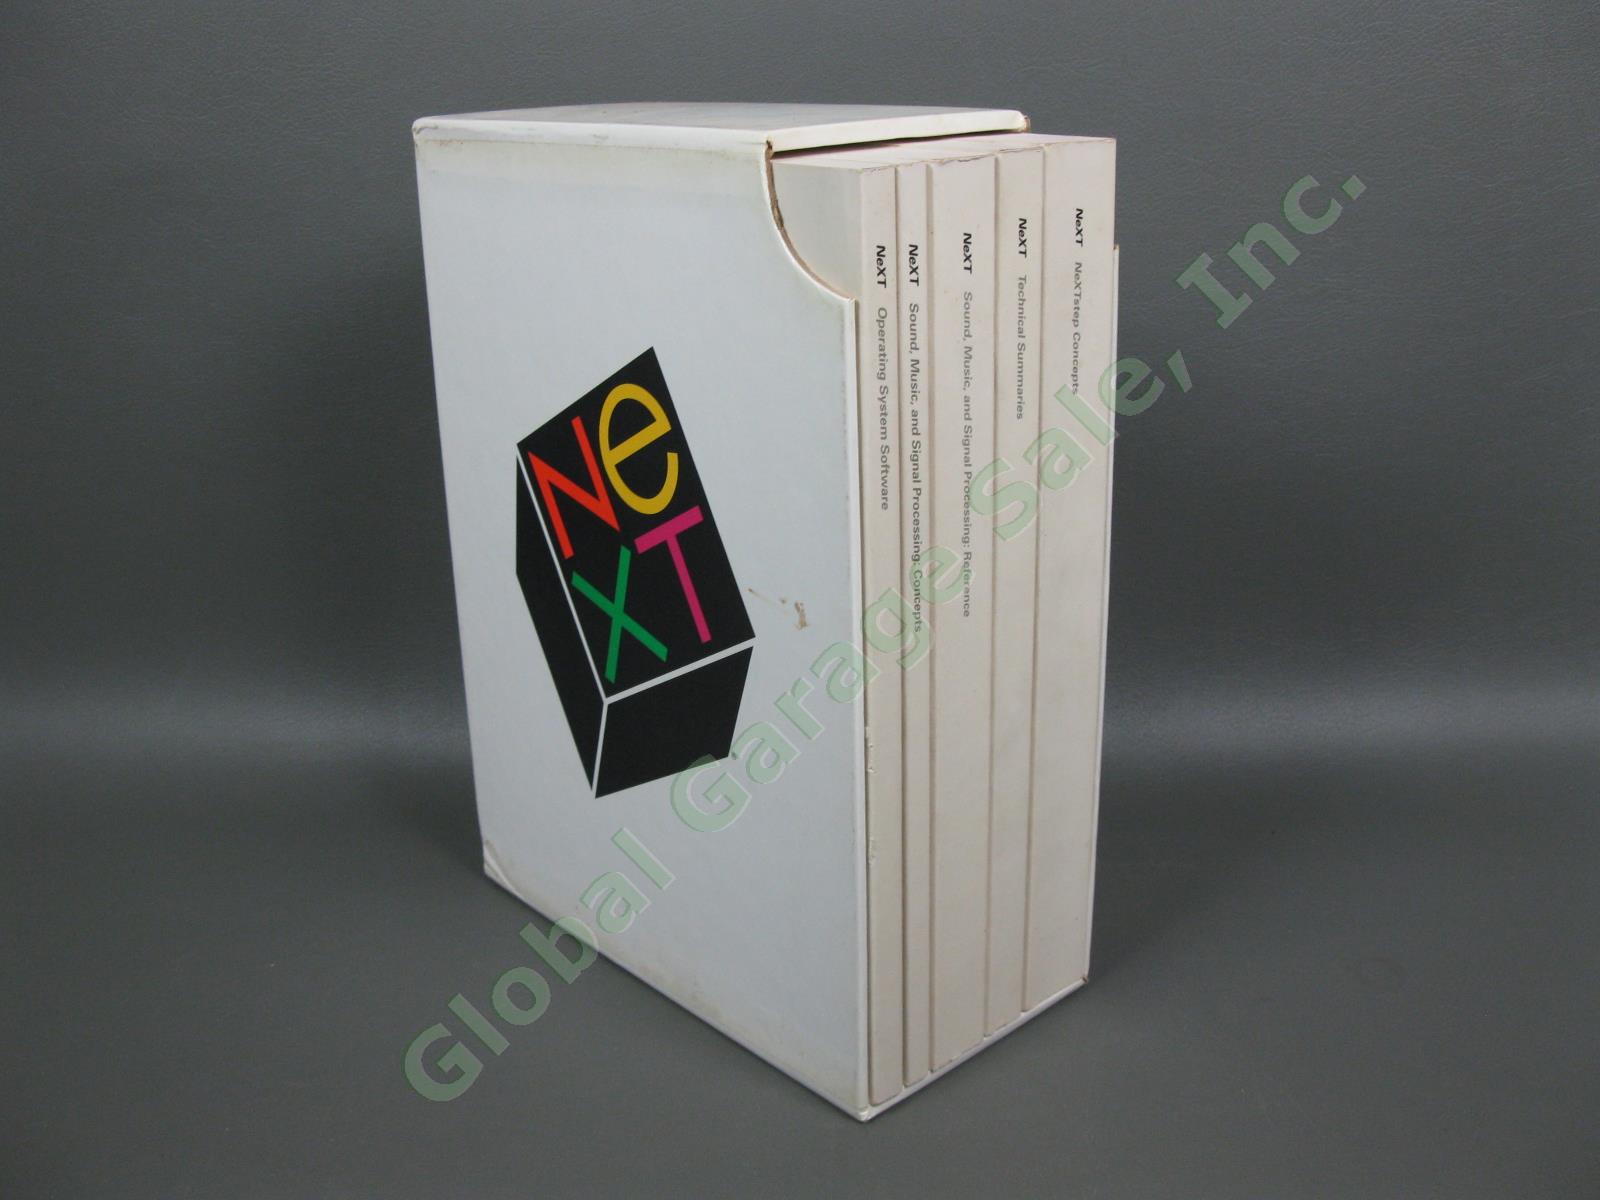 5 Next Cube Computer System Operating Manual Set Nextstep Concepts Jobs Apple NR